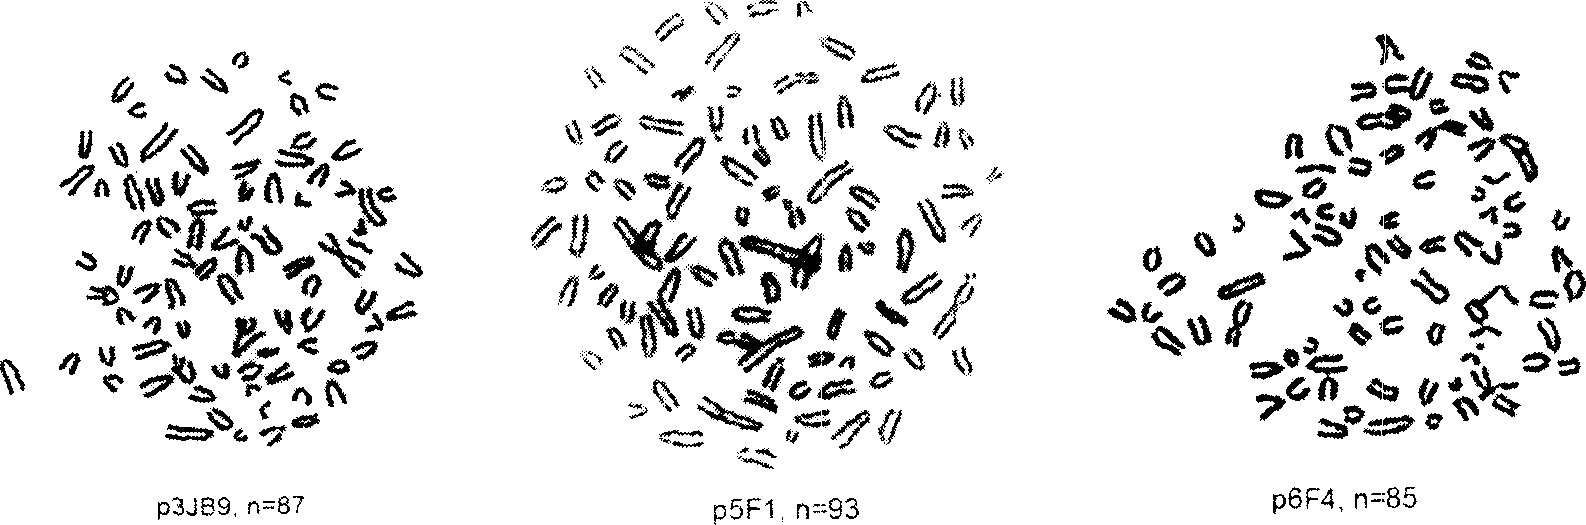 Monoclonal antibody of anti human immune deficiency virus I type 24 protein and application thereof